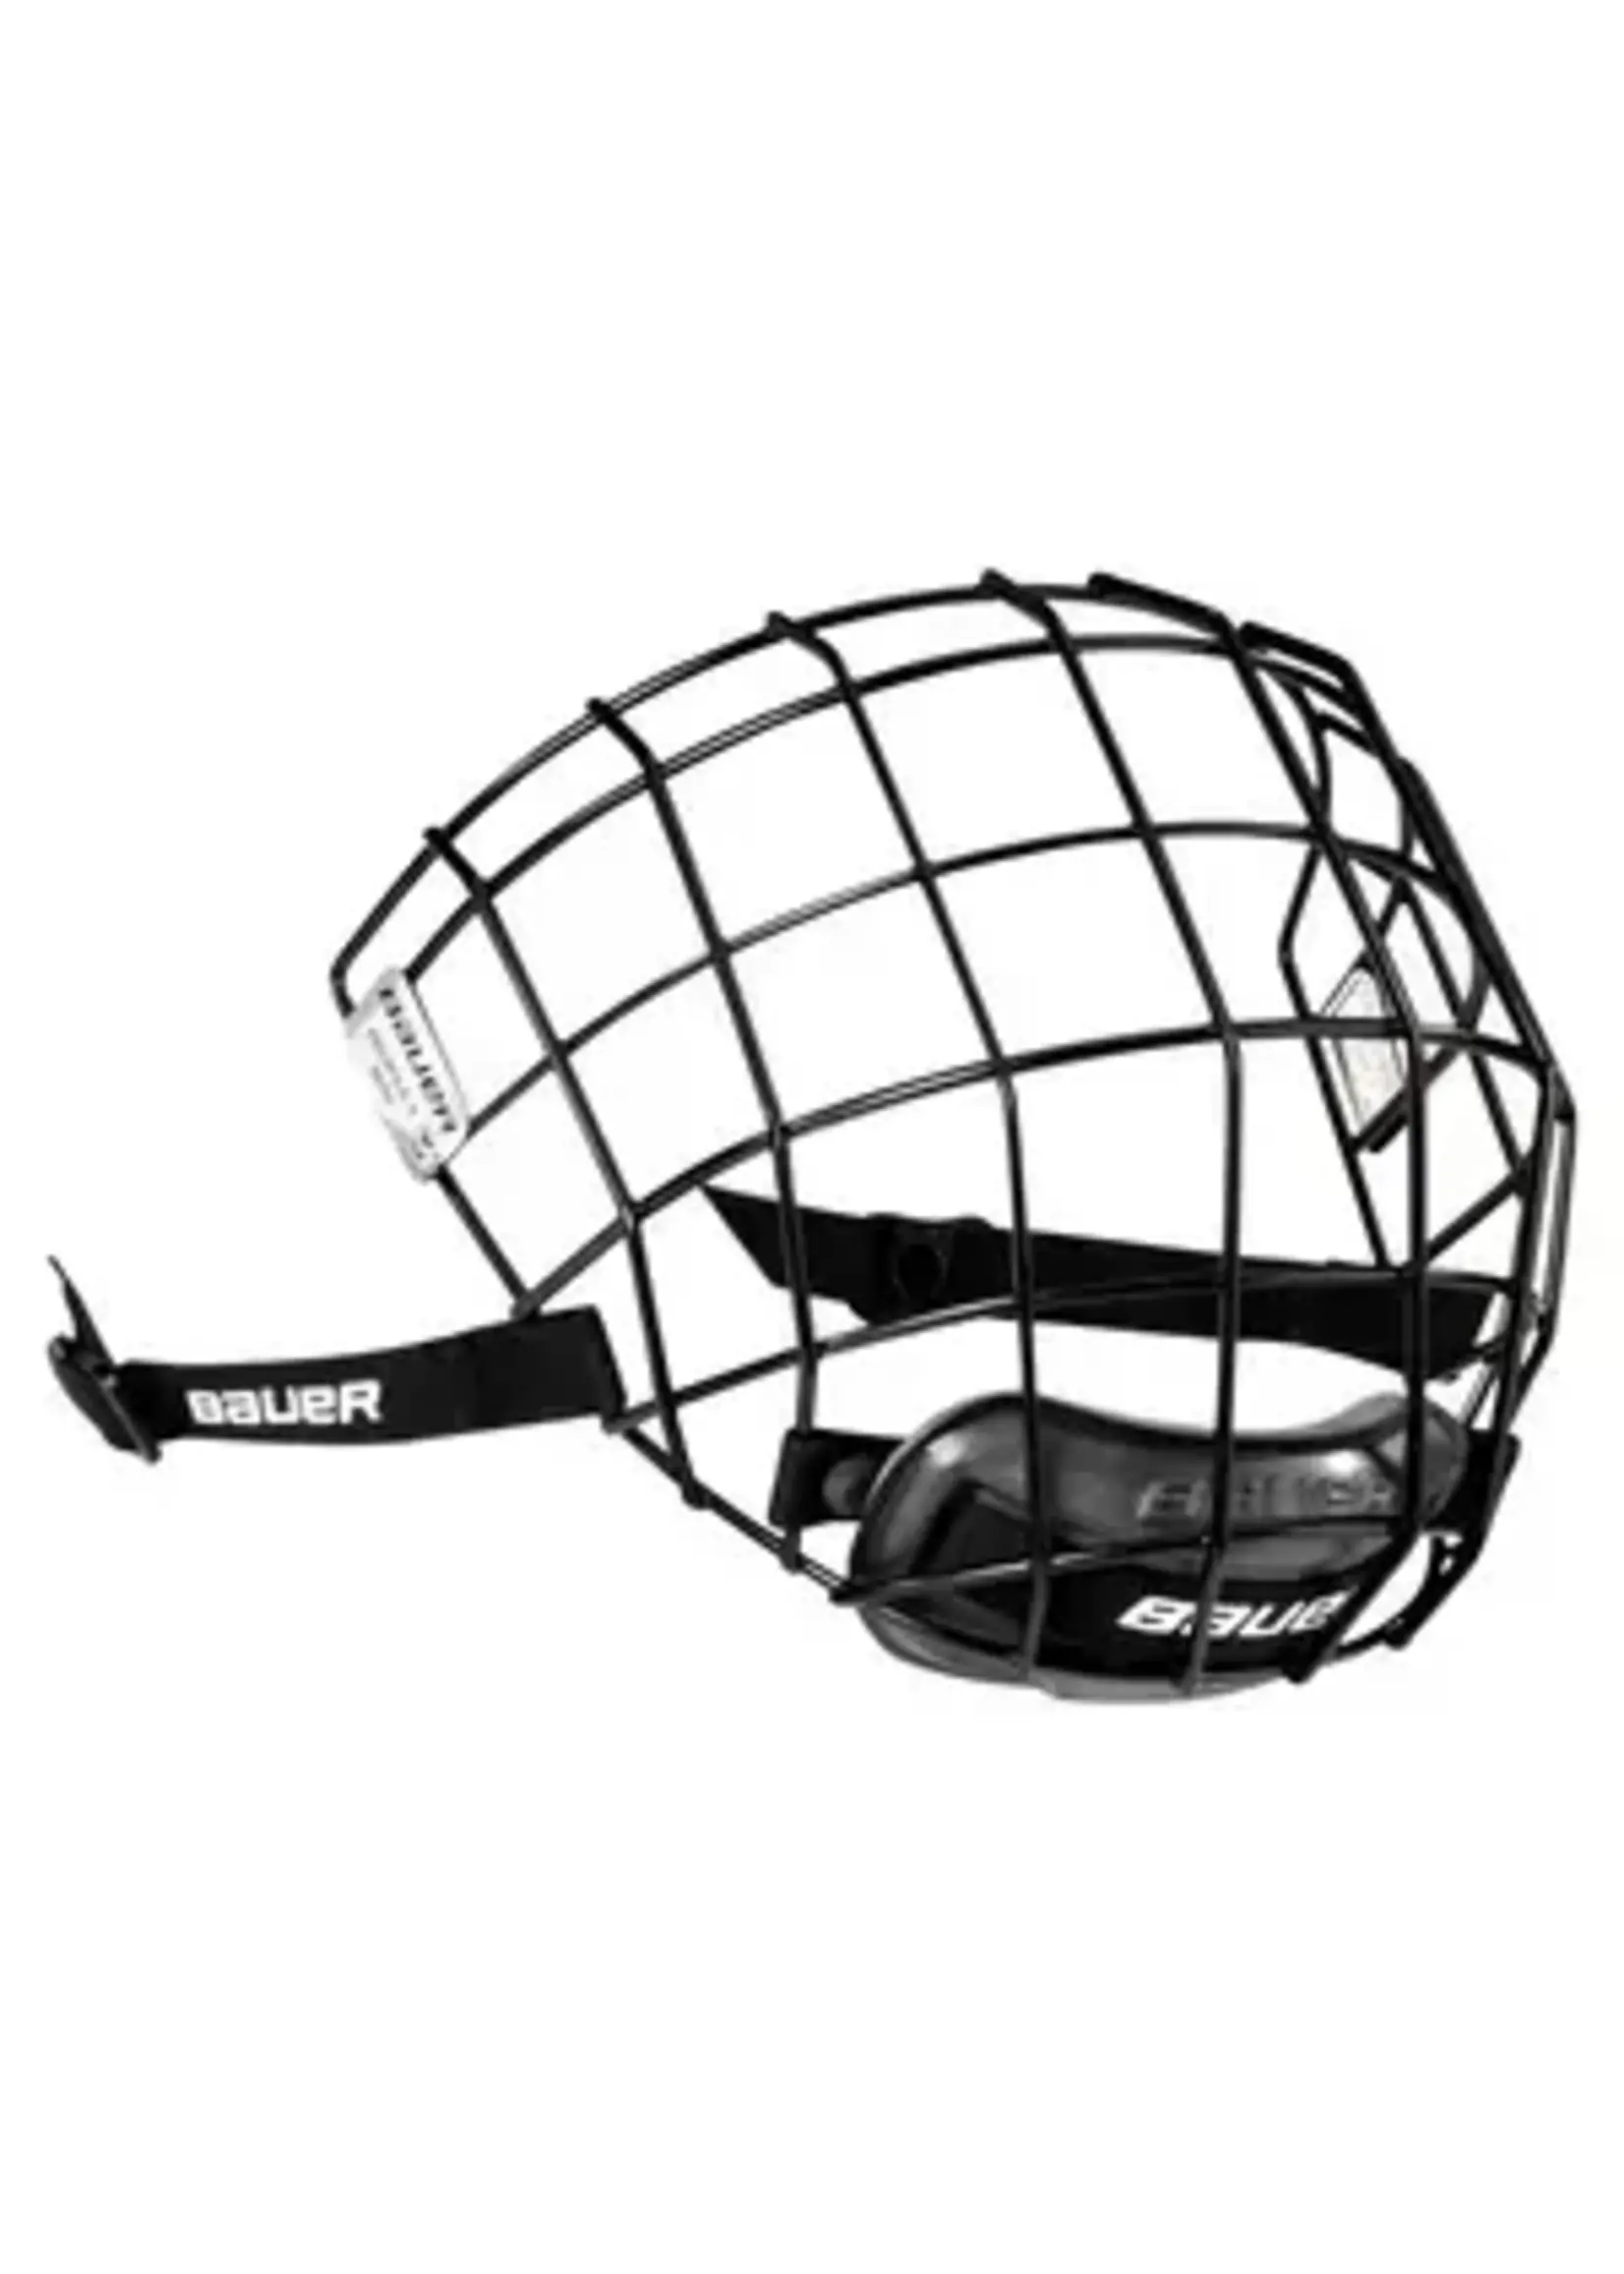 BAUER S23 BAUER II-FACEMASK